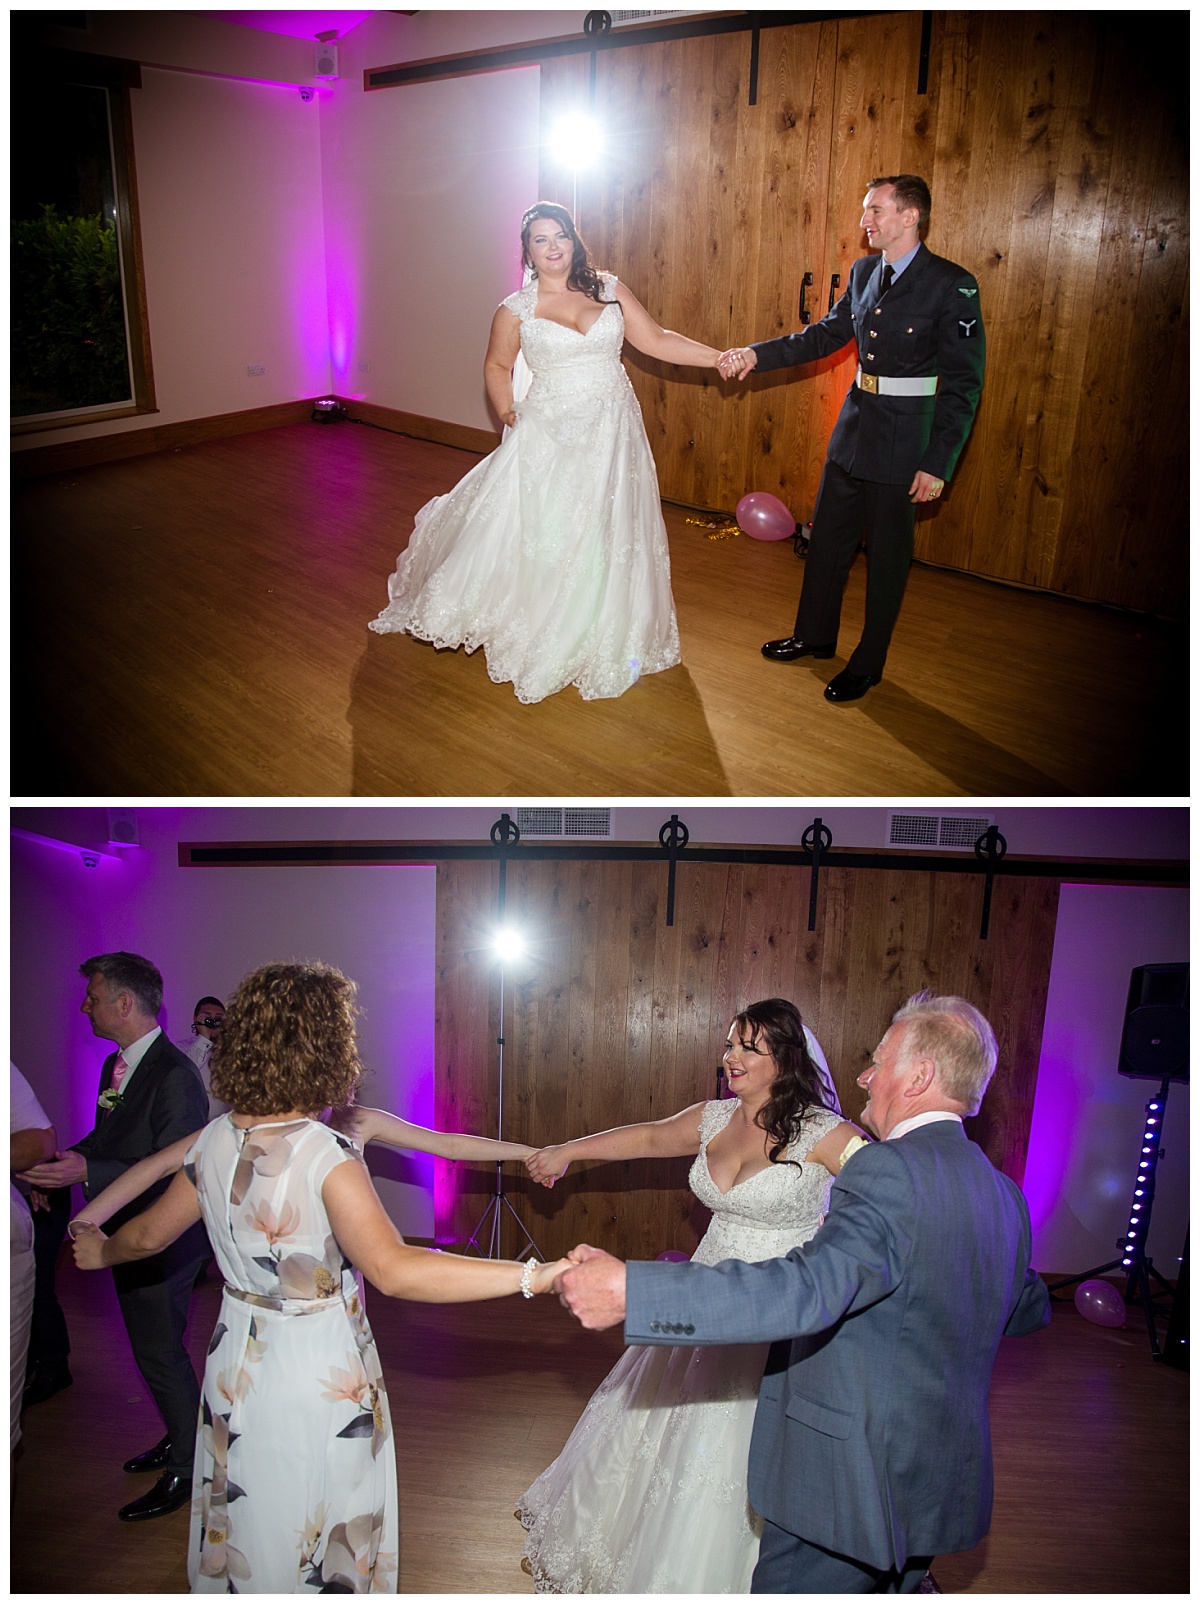 Wedding Photography Manchester - Claire and Ian's Hyde Bank Farm Wedding 60